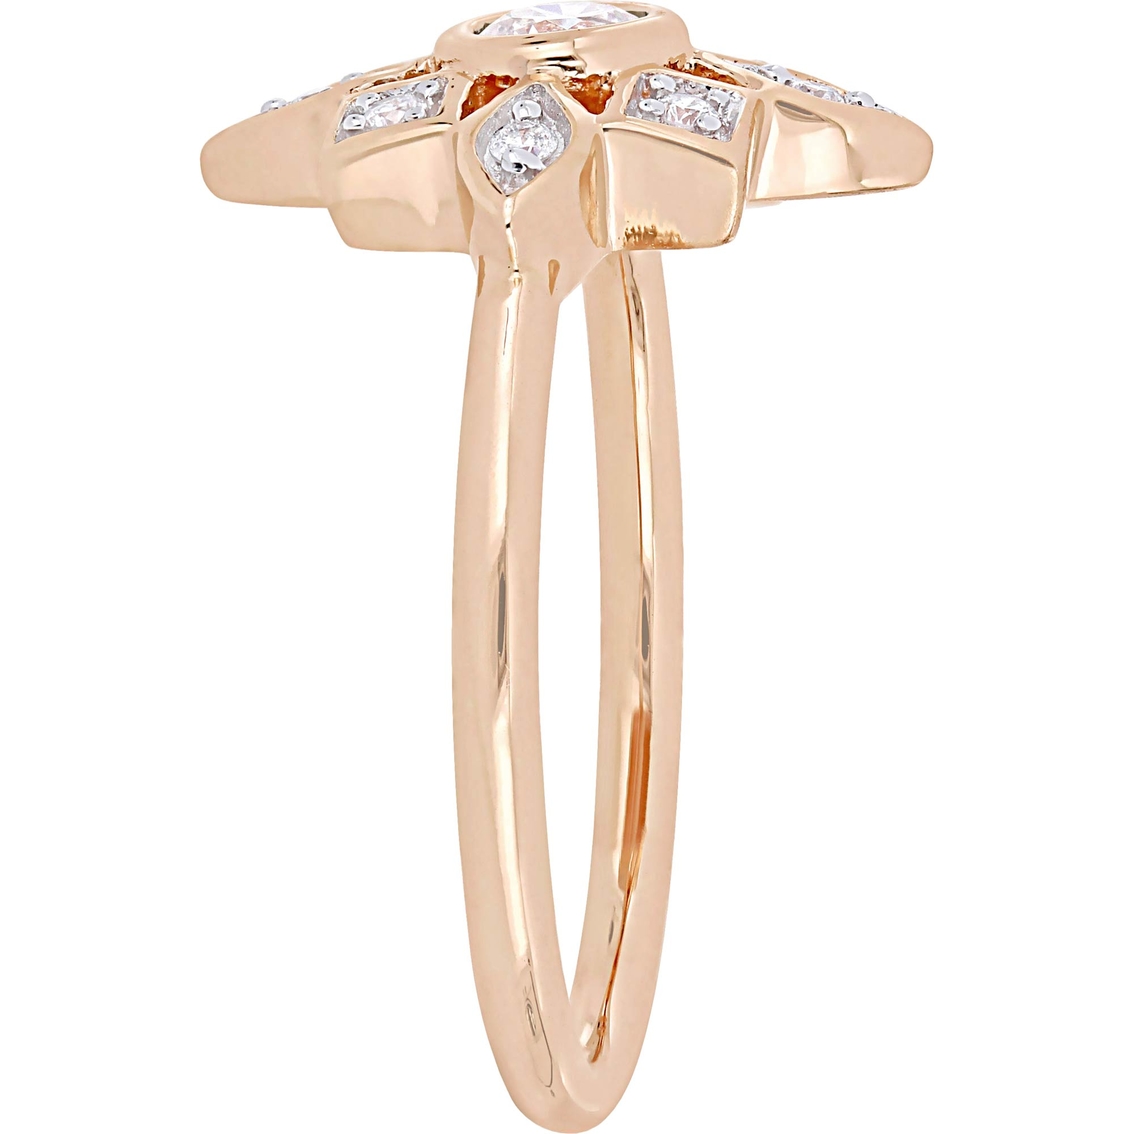 Diamore 10K Rose Gold 1/3 CTW Diamond Floral Ring - Image 2 of 4